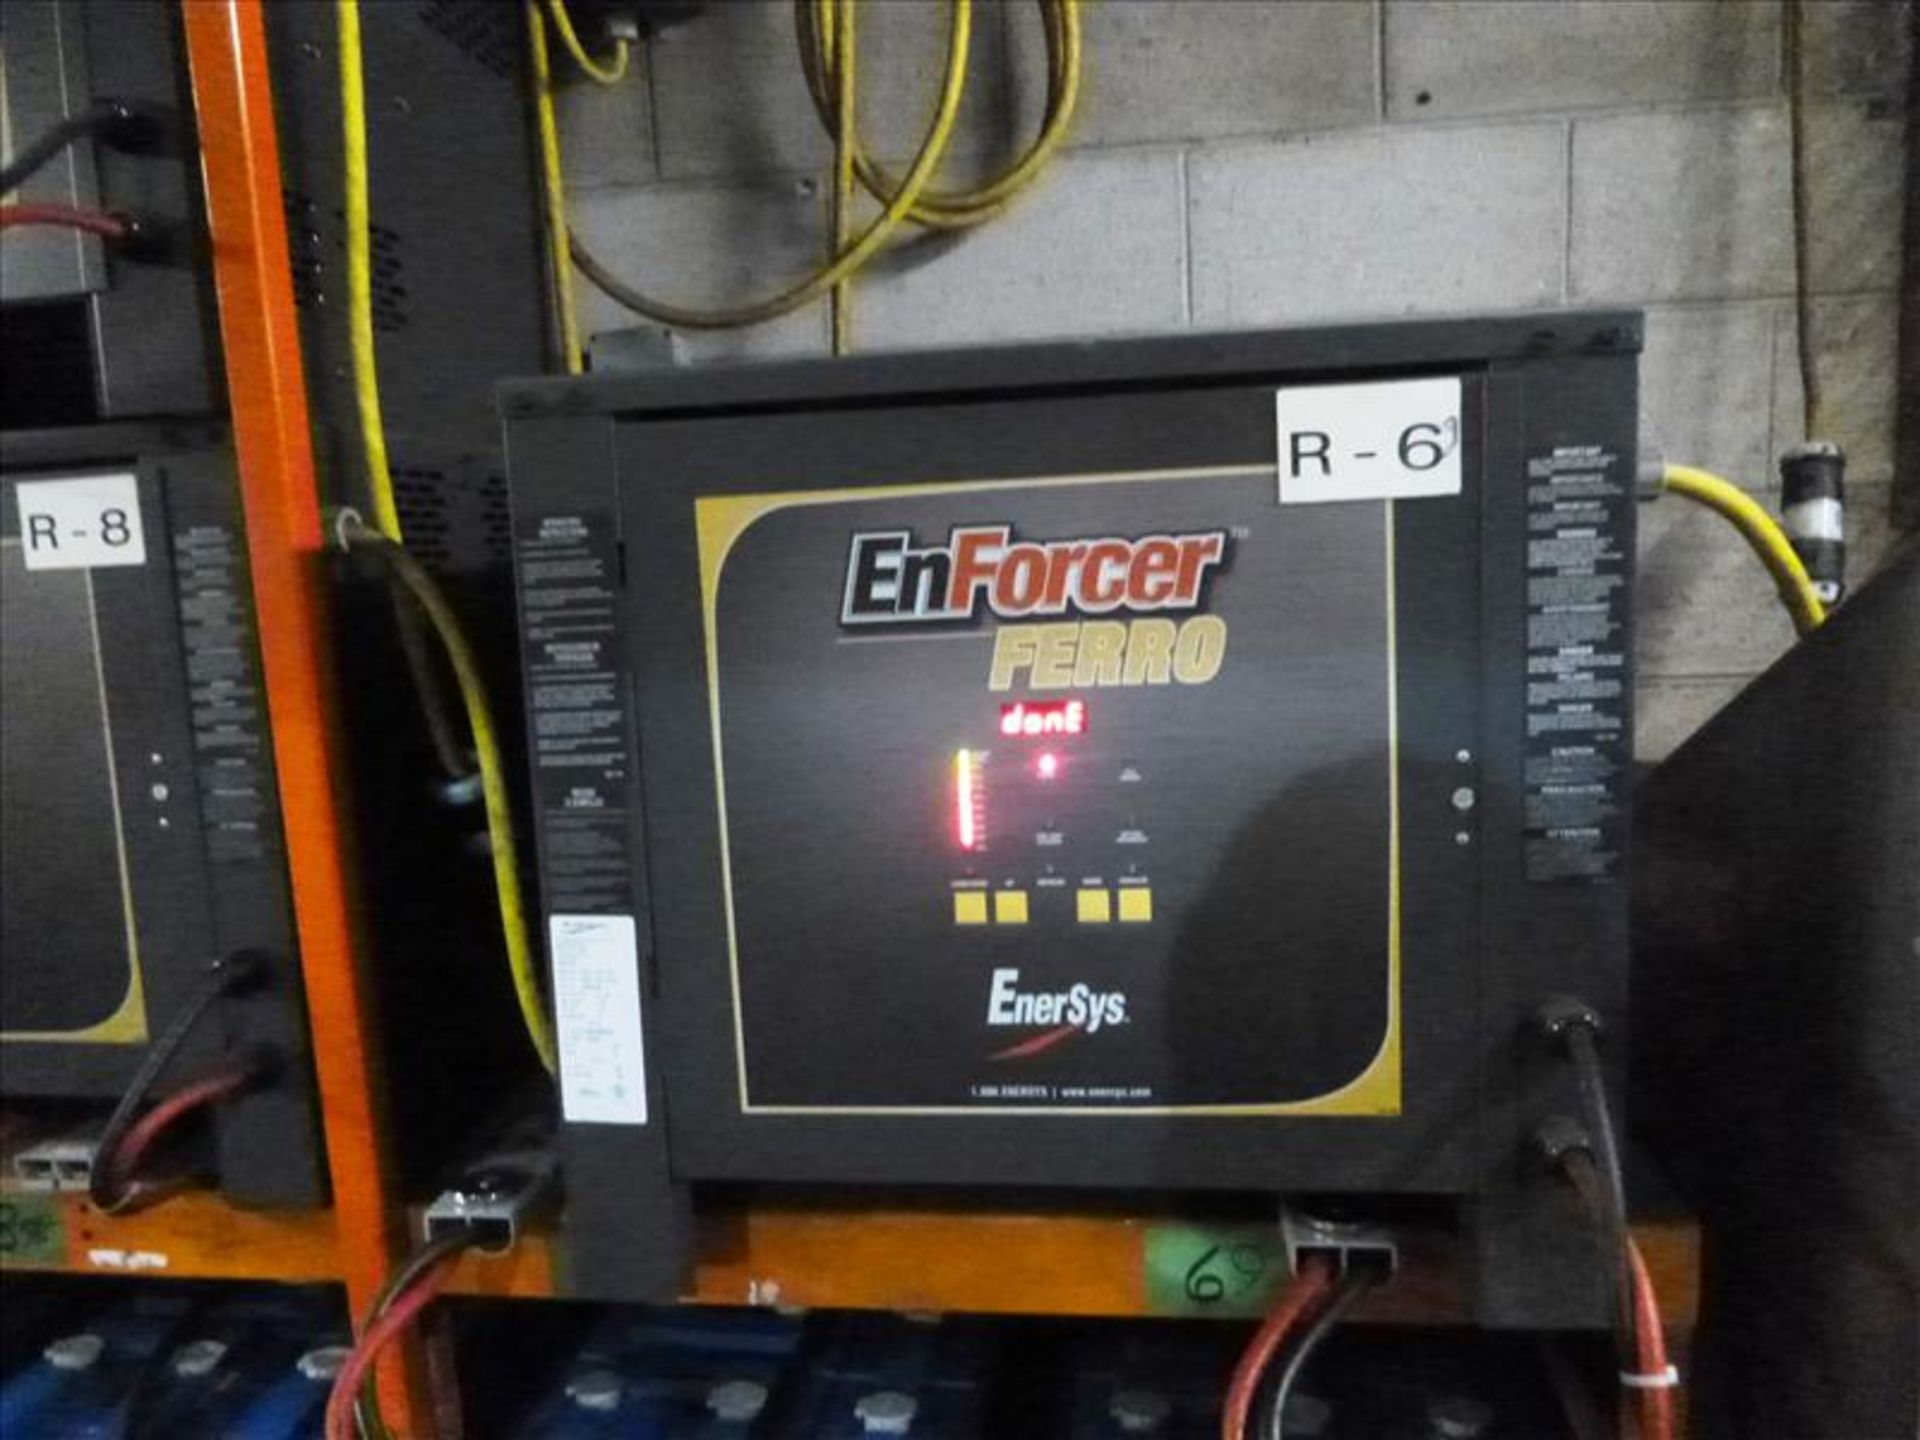 Enersys Enforcer Ferro battery chargers 36 volt